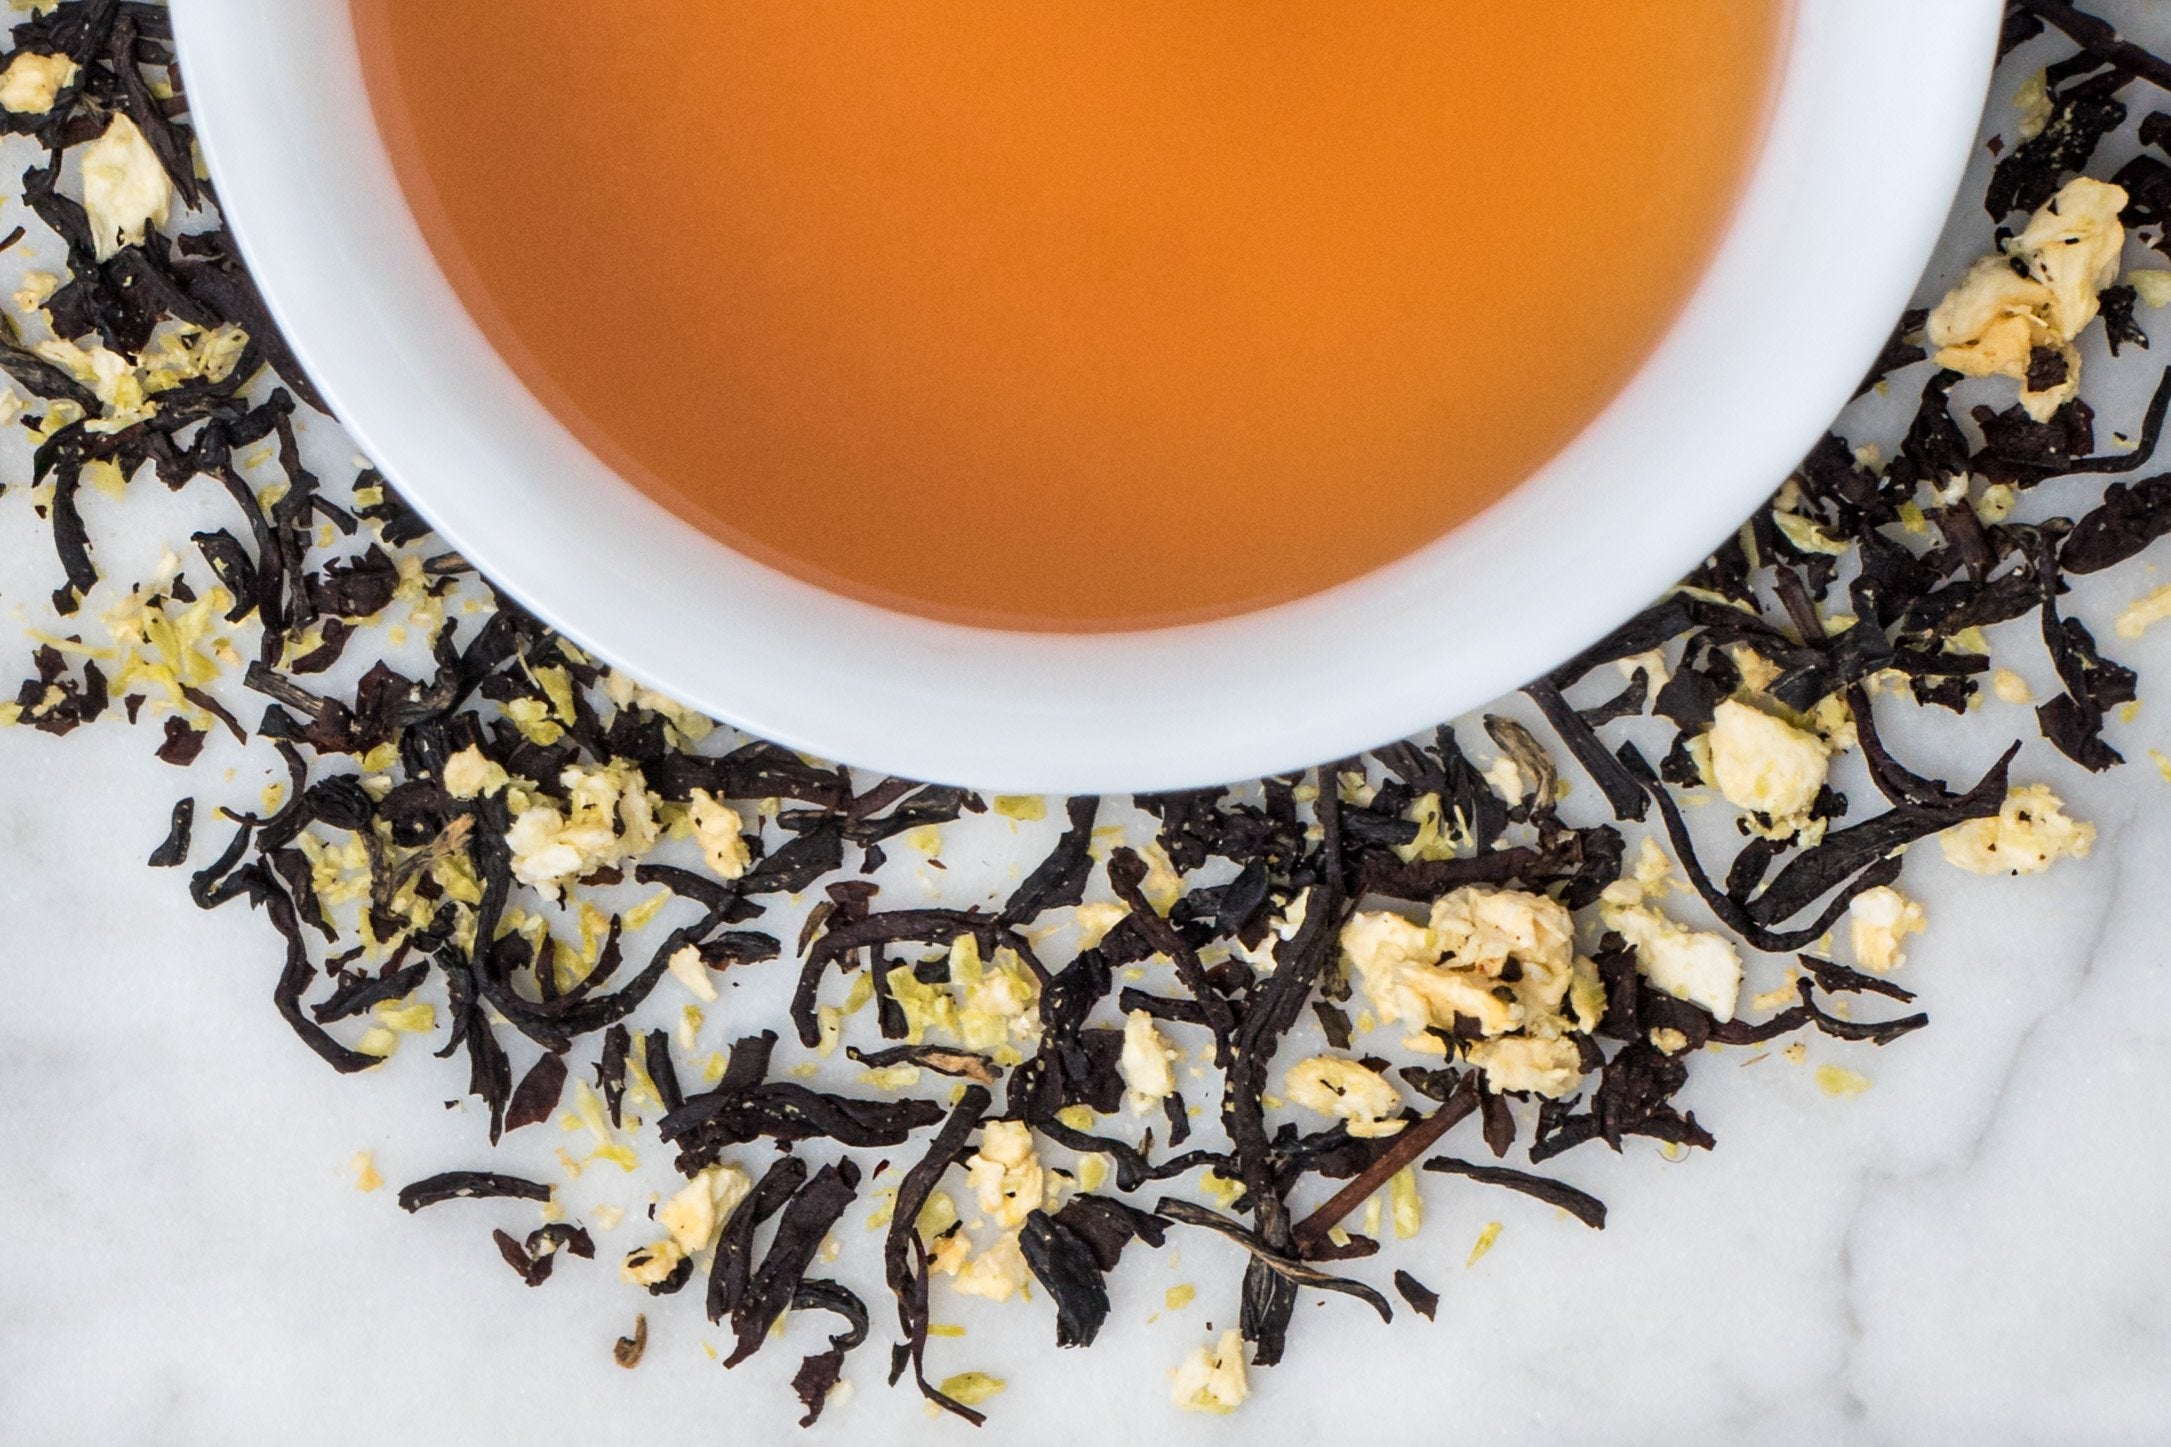 A Fun Black Tea Blend With Tropical Pineapple And Coconut Around A Cup Of Brewed Palm Tree Bliss